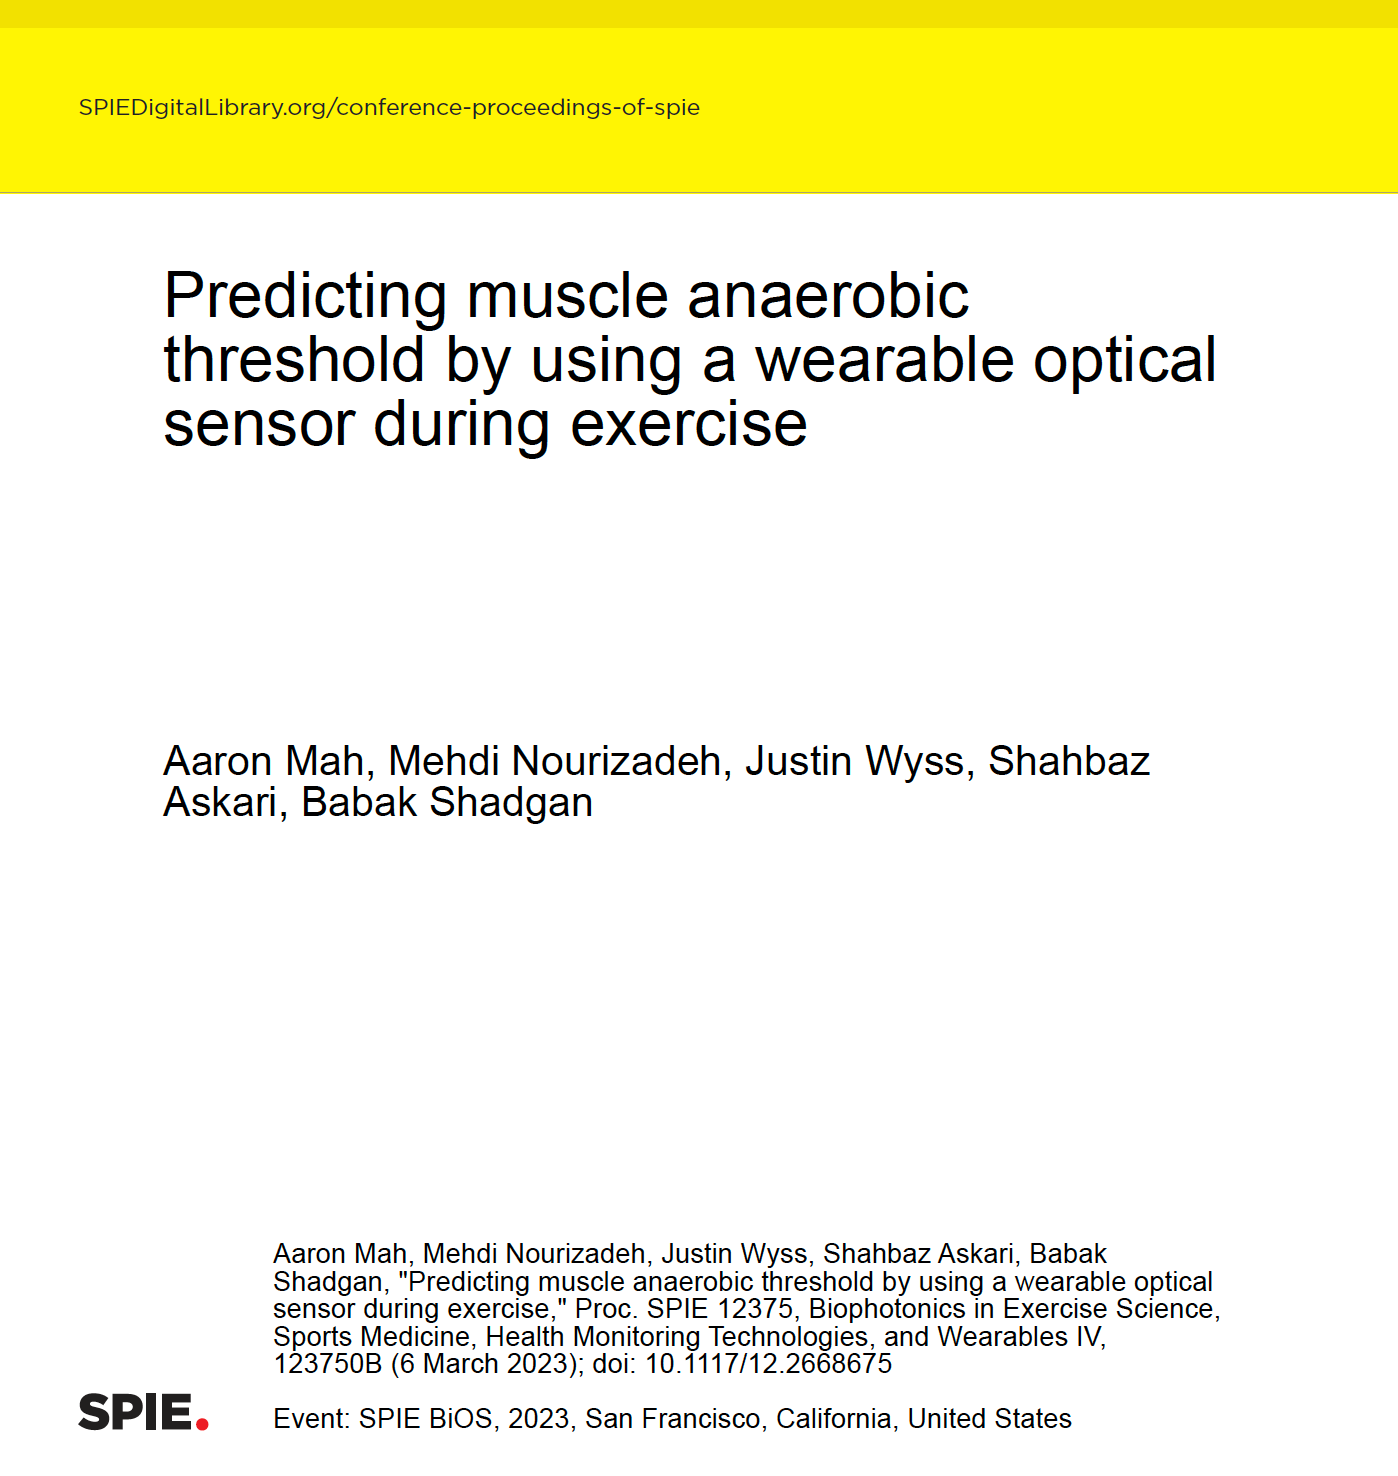 New Publication: Predicting muscle anaerobic threshold by using a wearable optical sensor during exercise